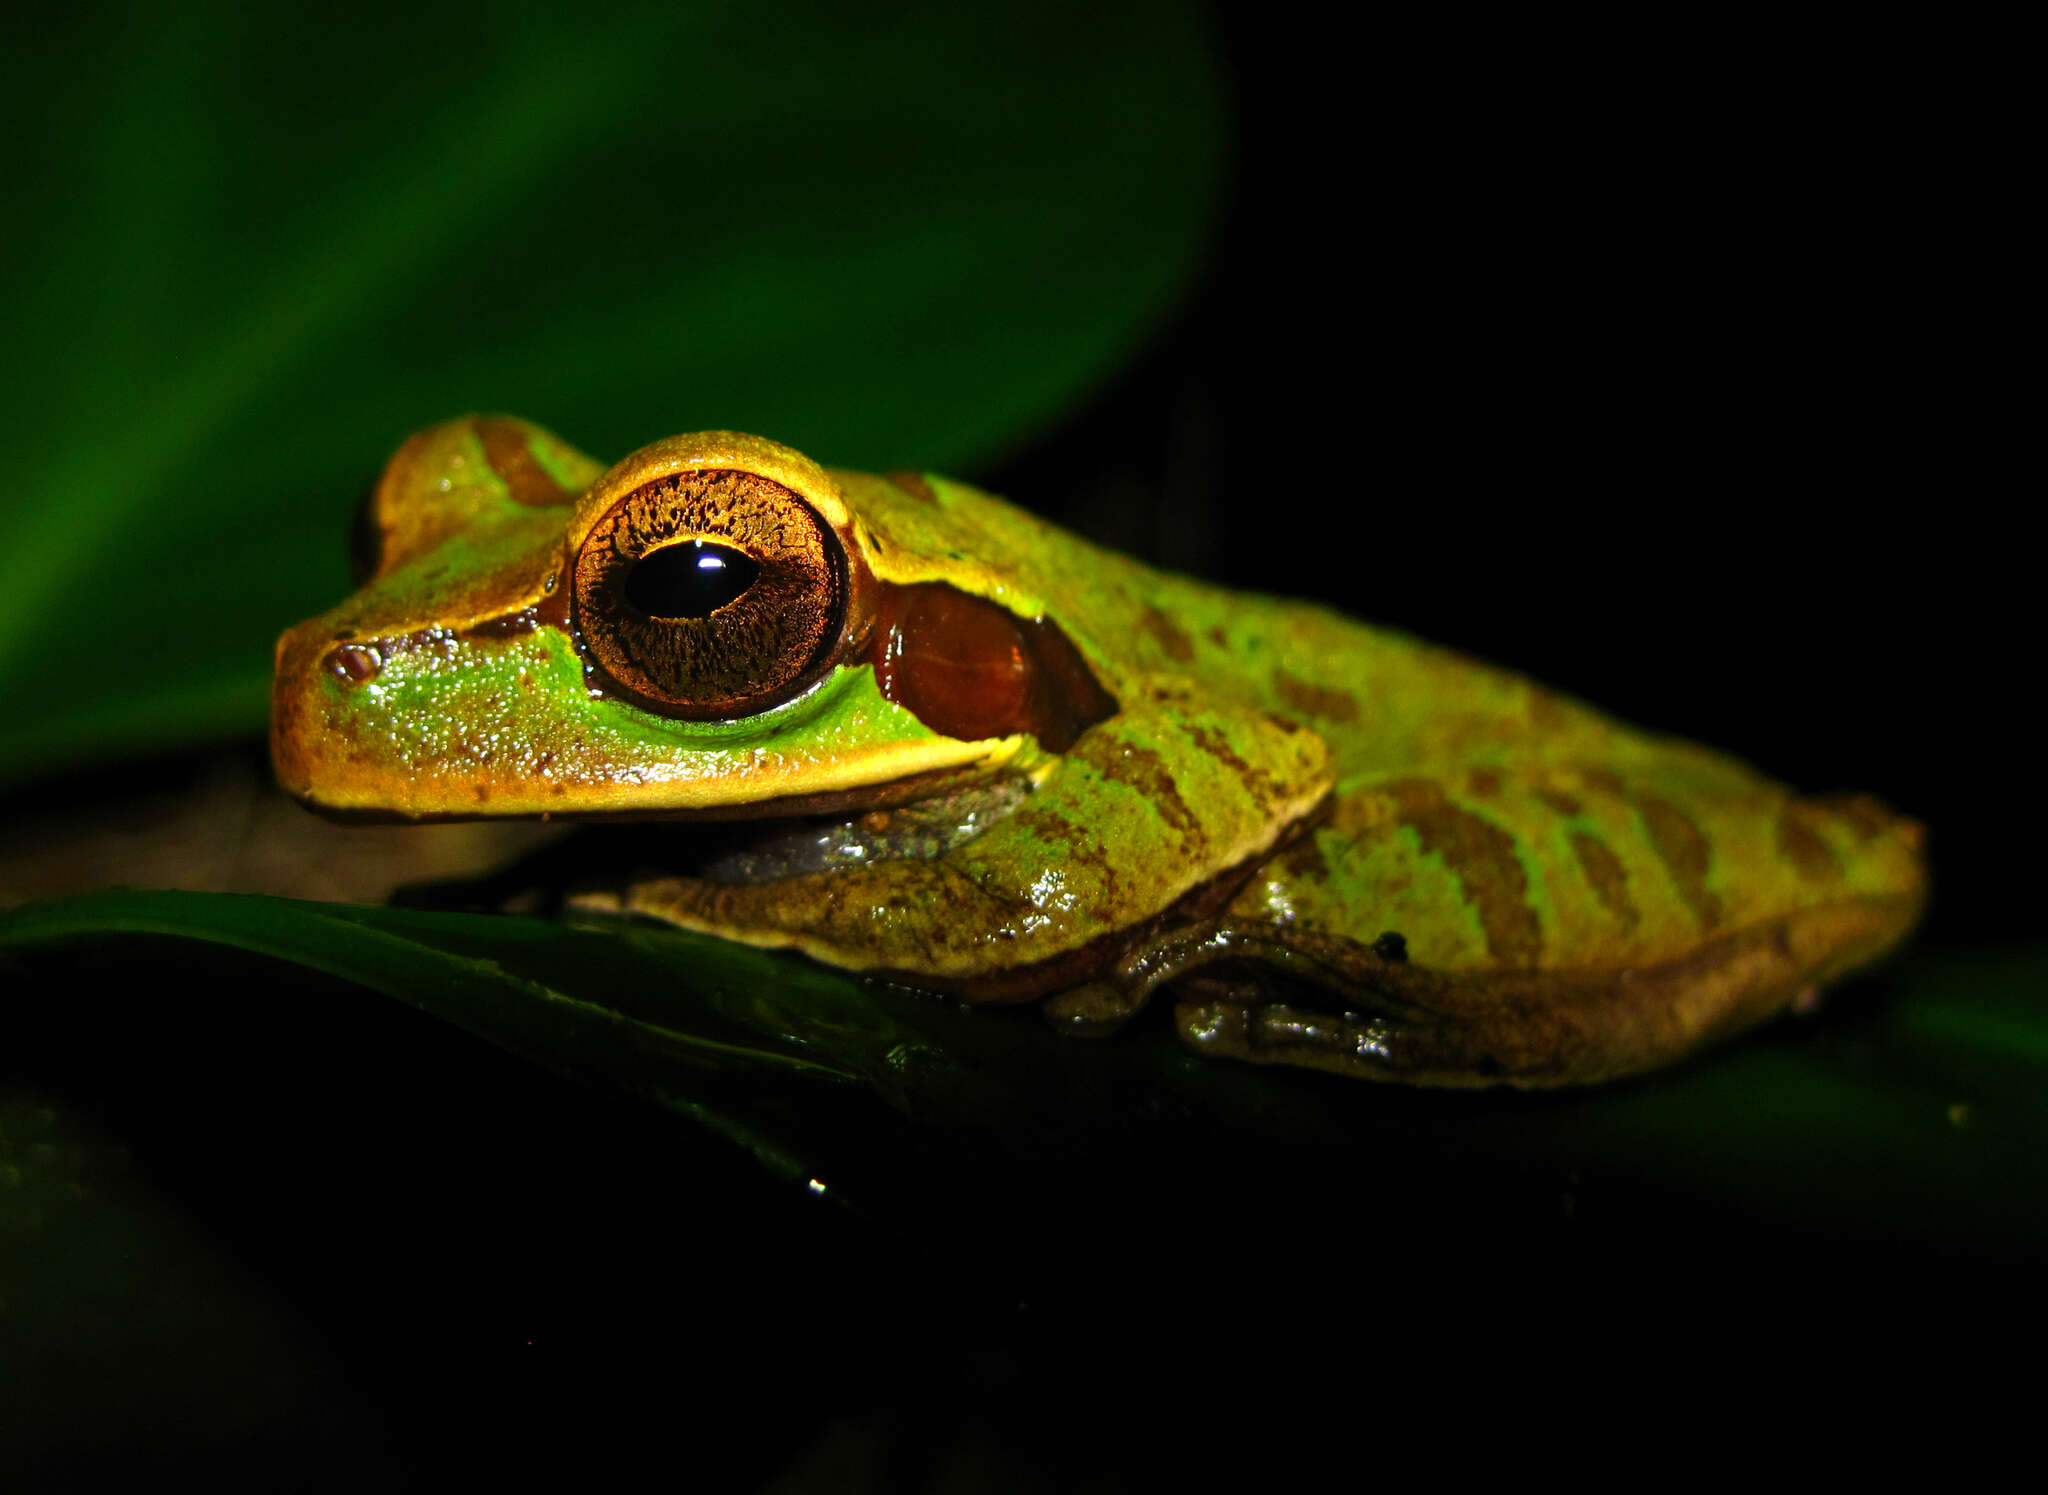 Image of Blue-spotted Mexican Treefrog